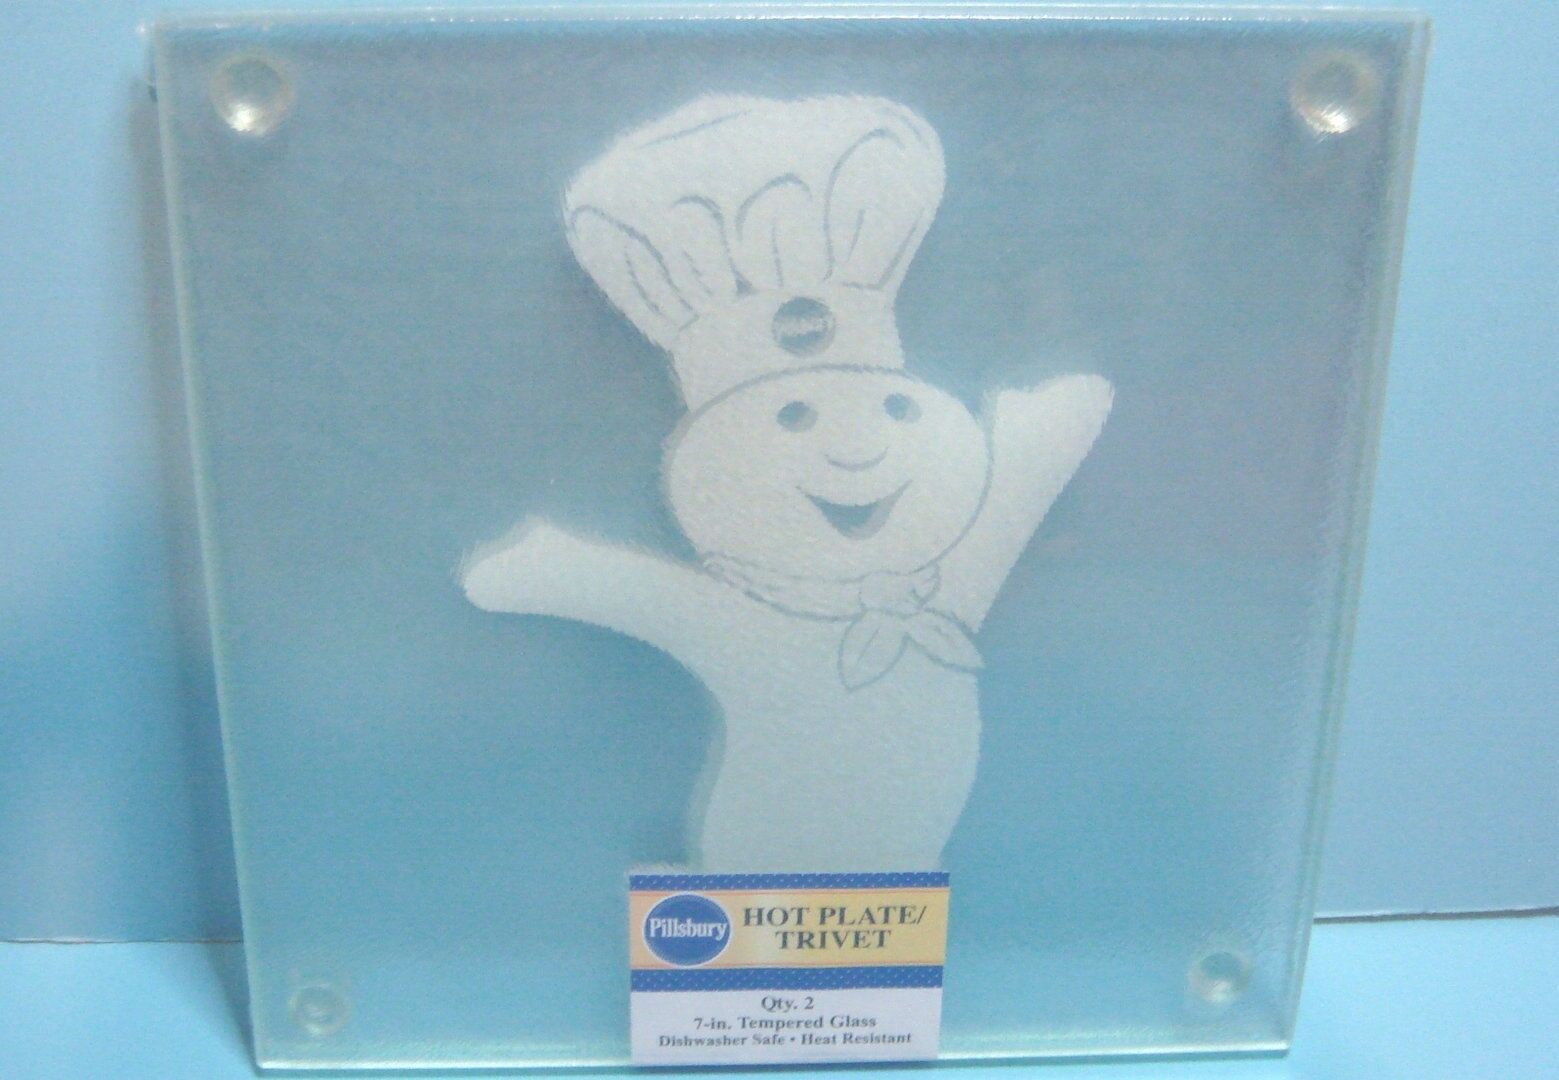 NEW Pillsbury Doughboy Etched Glass Trivets Hot Plates (Set of 2) - Poppin Fresh